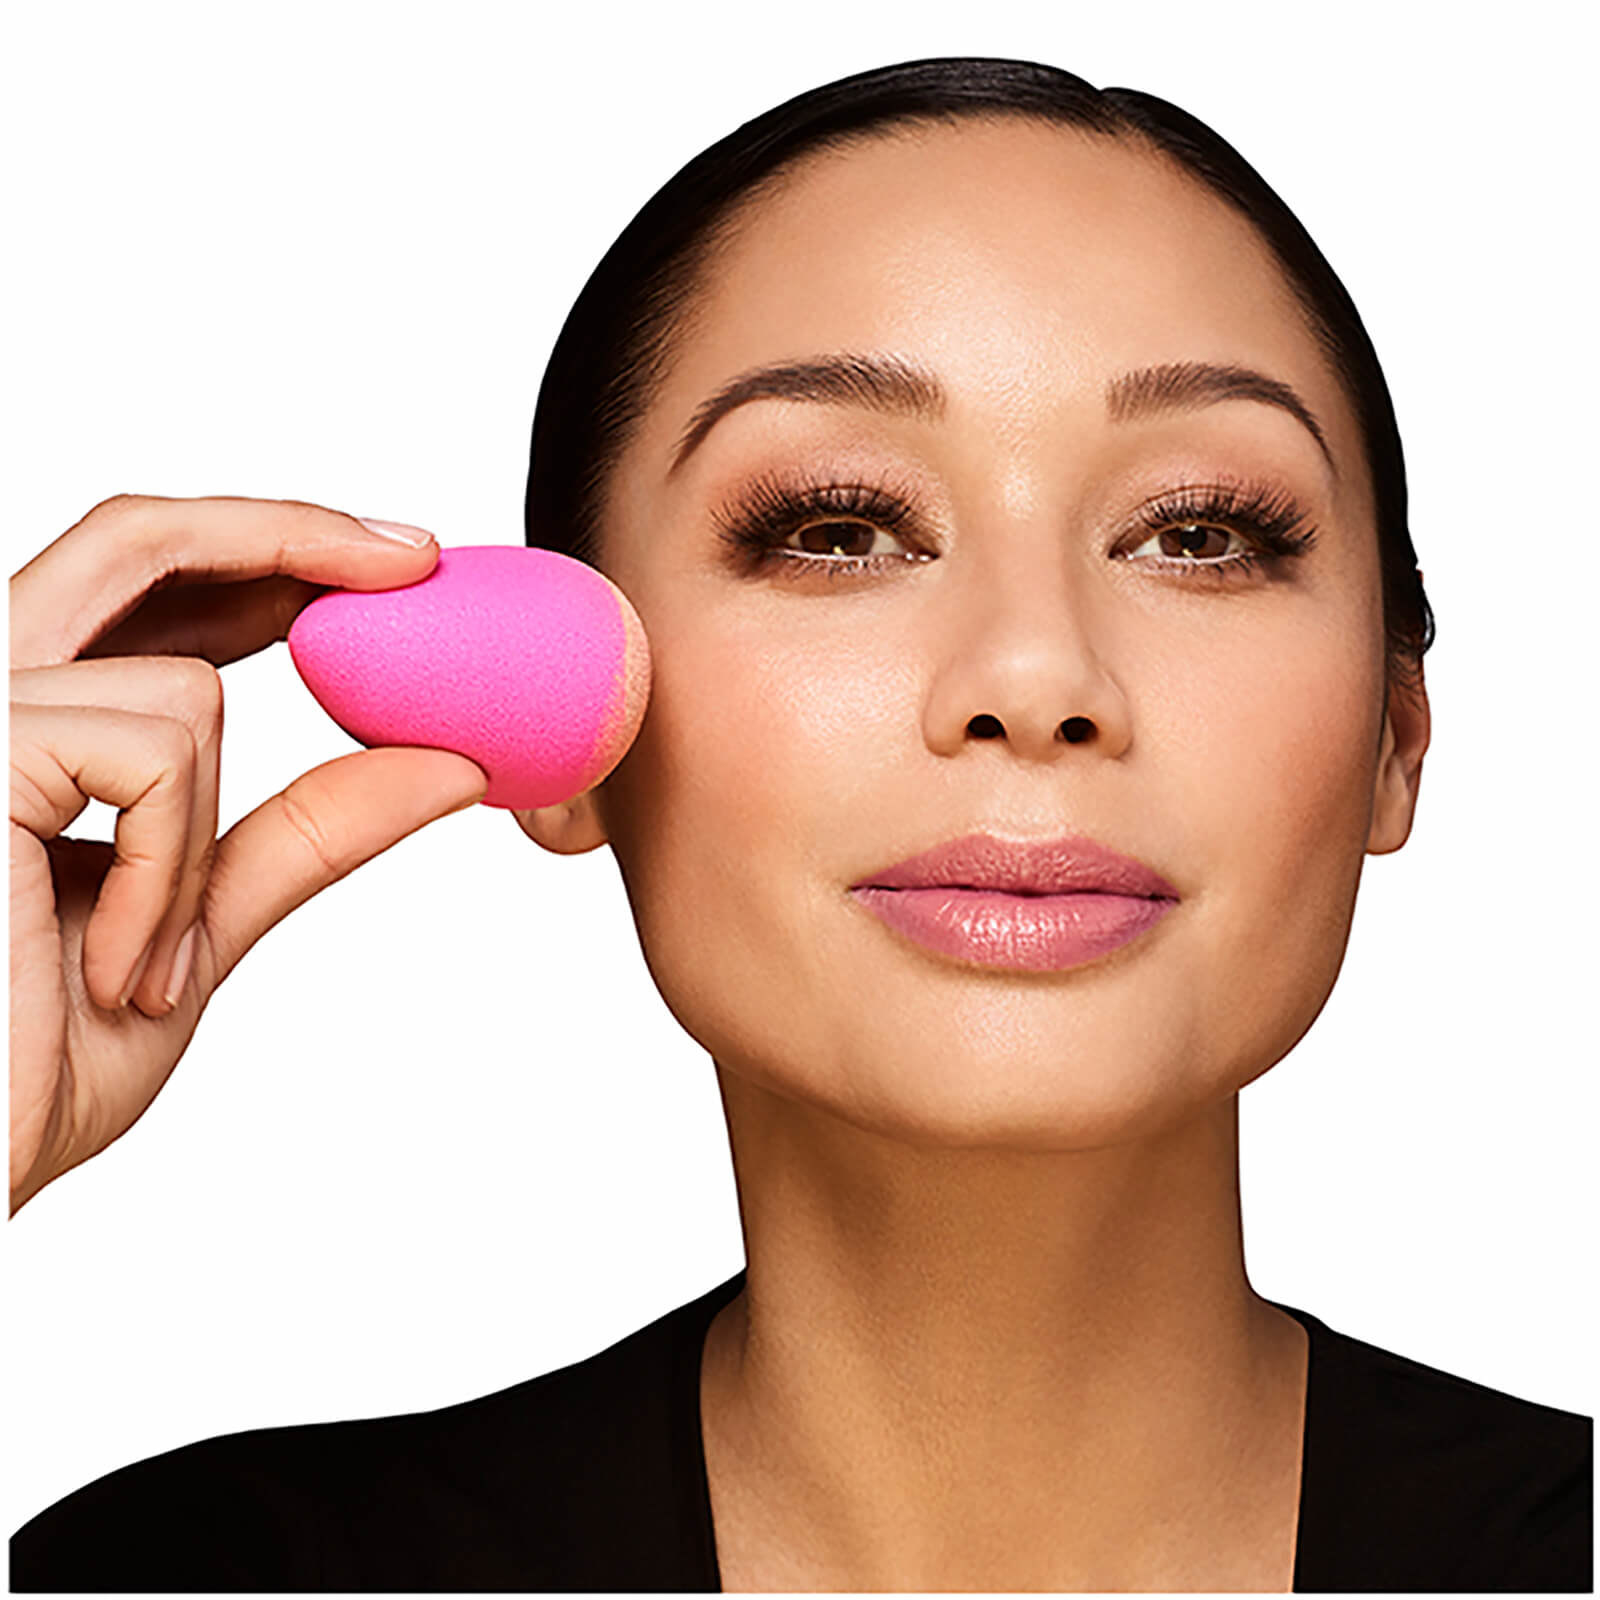 A person using the palm-sized, egg-shaped BeautyBlender to blend makeup